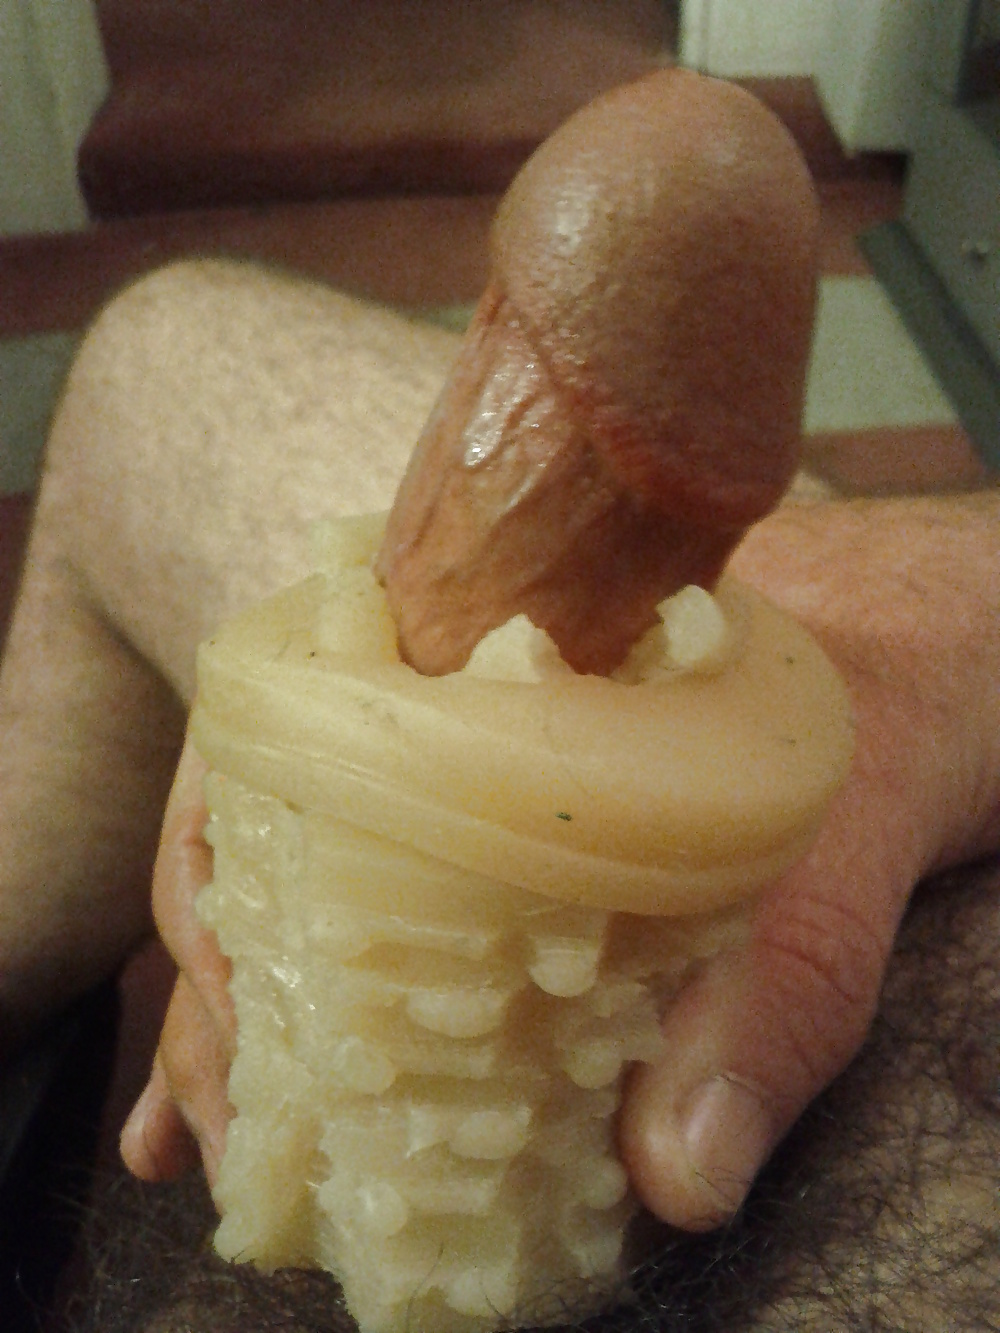 Using some of my sex toys #23779452